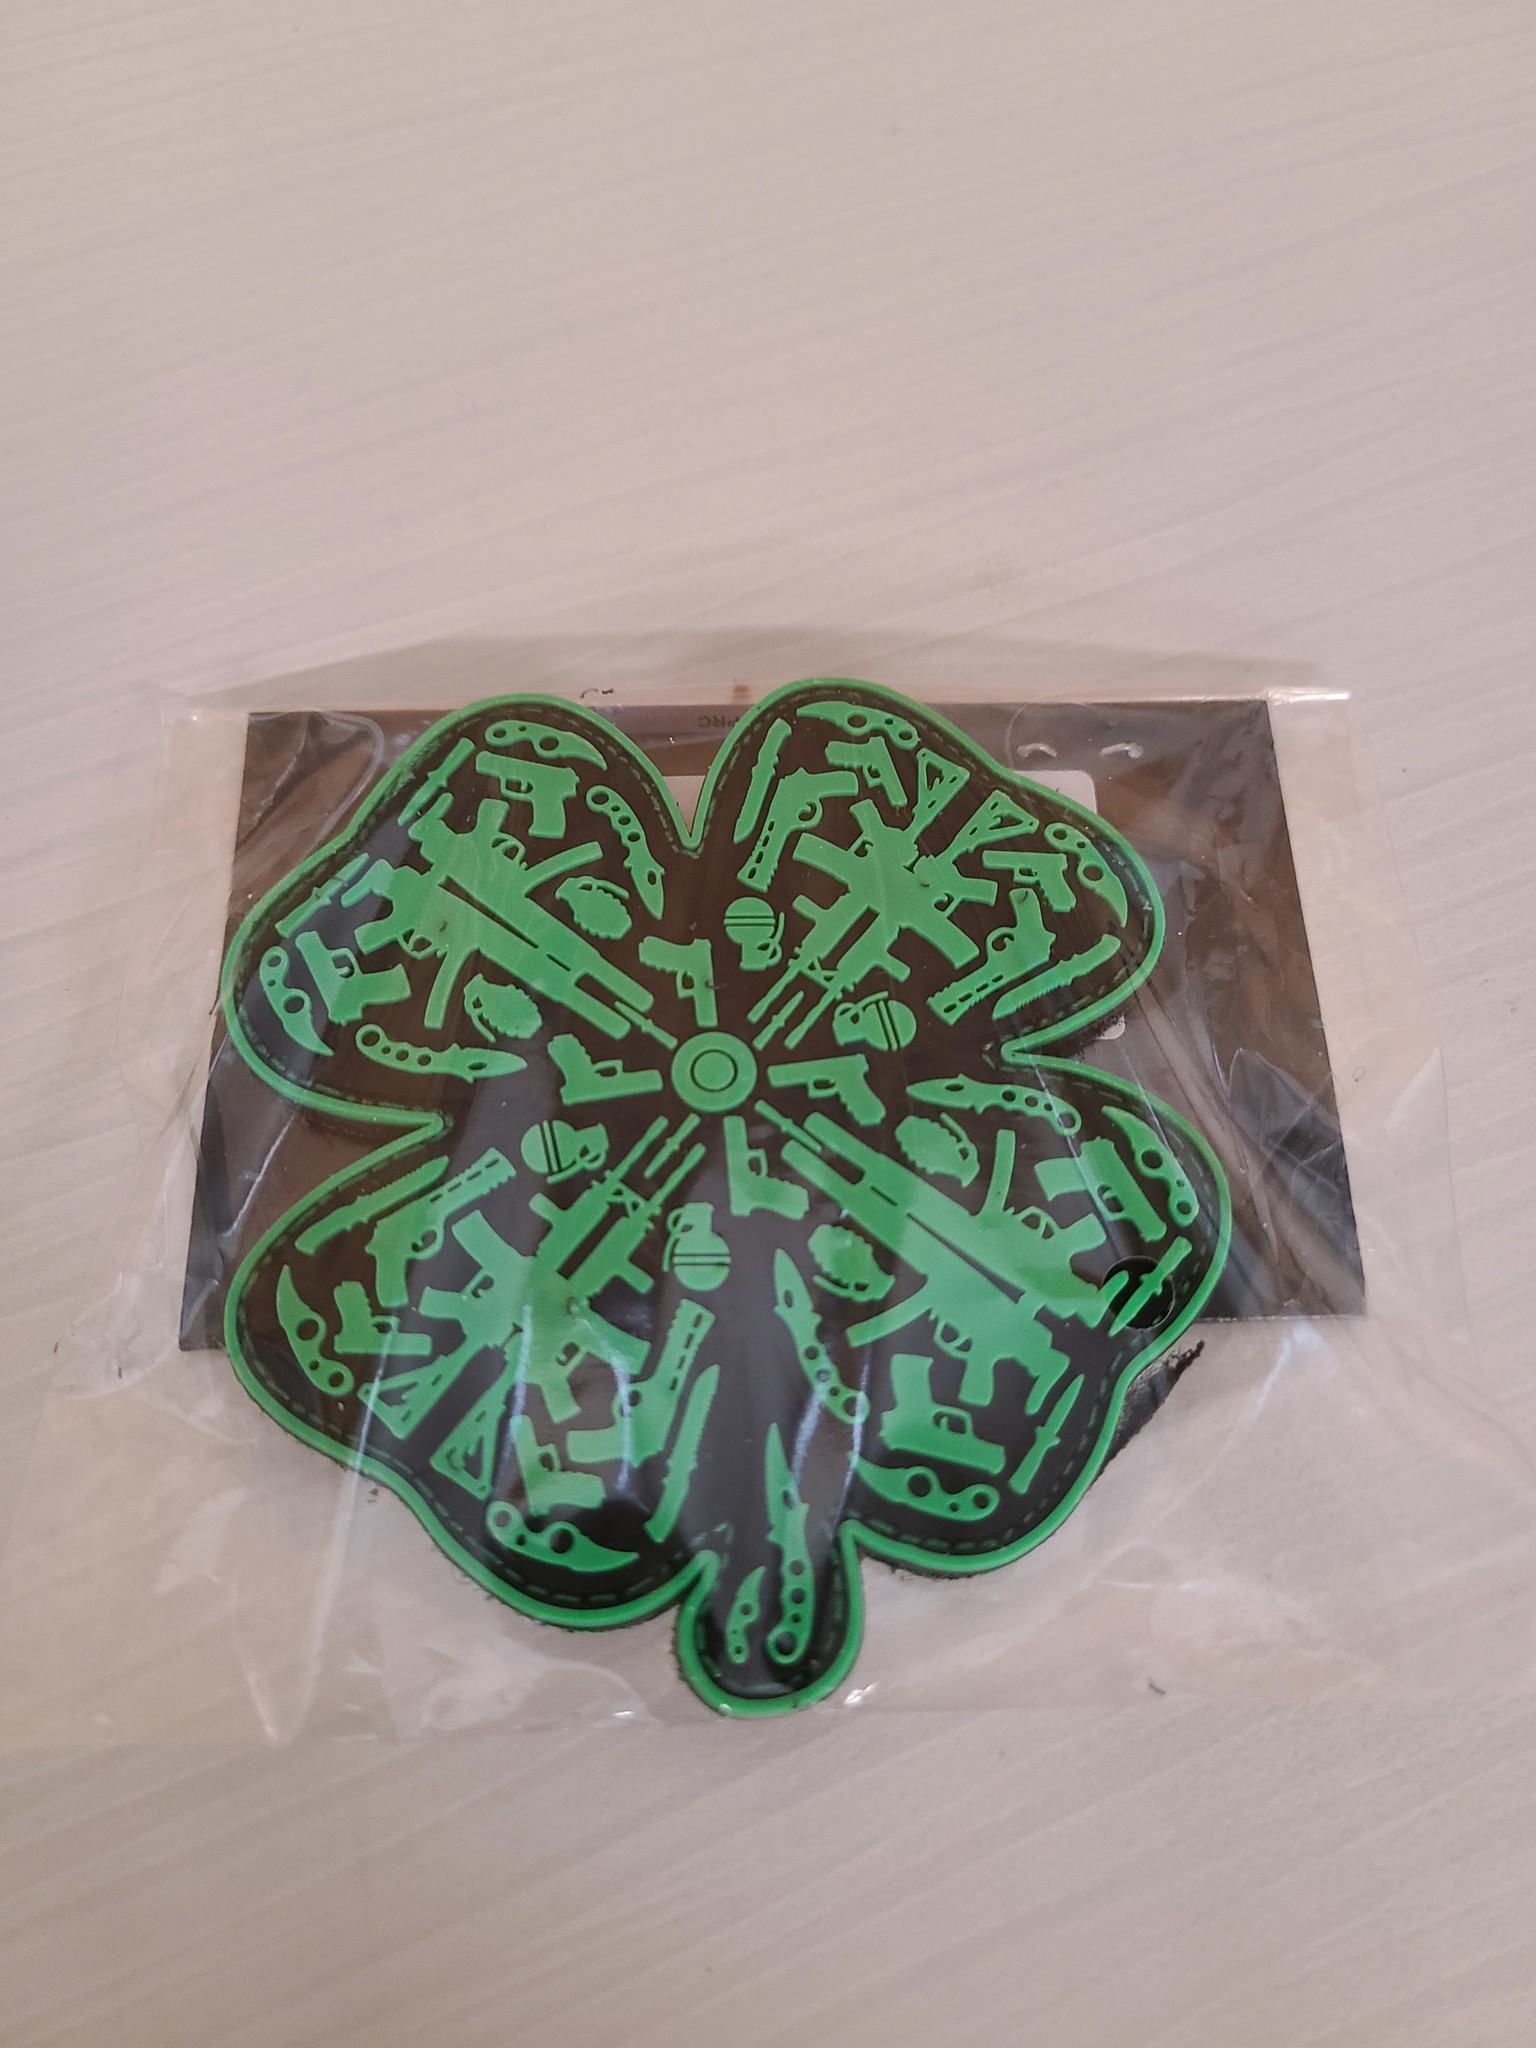 Tactical Innovations Canada PVC Morale Patch -Lucky Clover 3.5" X 3.5" Glow In The Dark